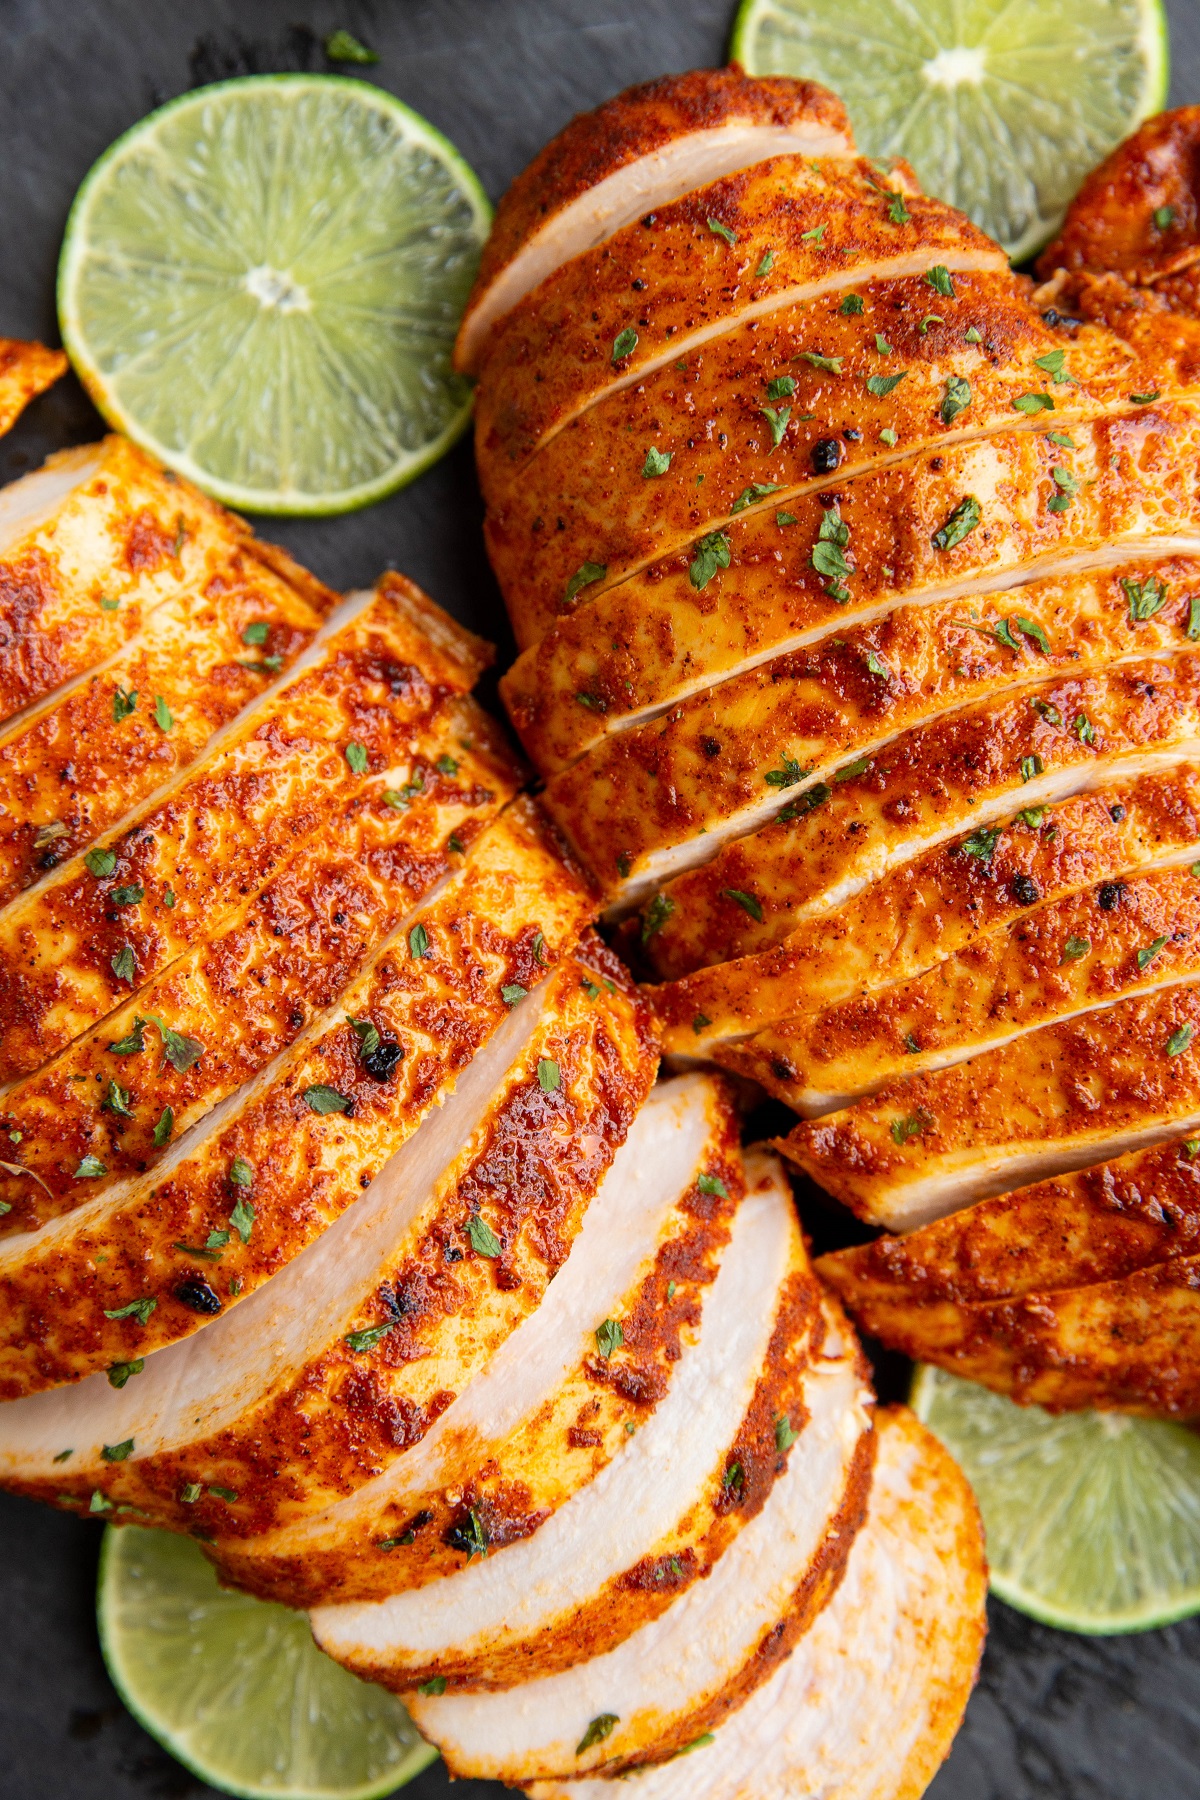 Sliced chili lime chicken breasts on a cutting board.